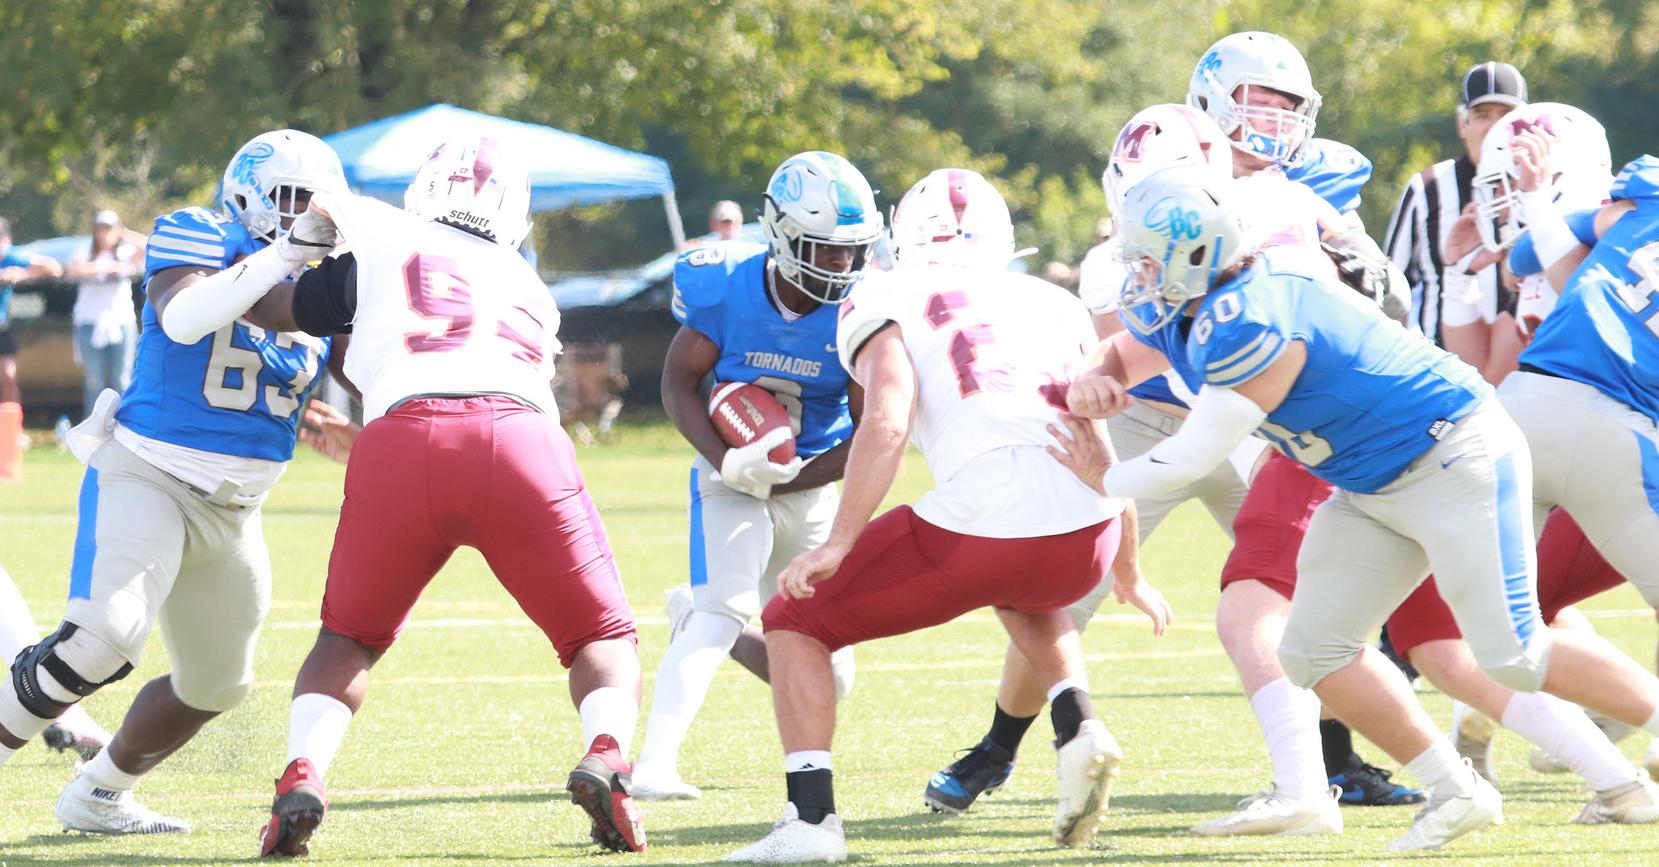 Mitchell Yoder rushed for a DIII-era record 220 yards (fourth-most in program history) and dashed for a program-record 97-yard touchdown run in BC's narrow defeat at Methodist (Photo courtesy of Victoria Brayman '22)